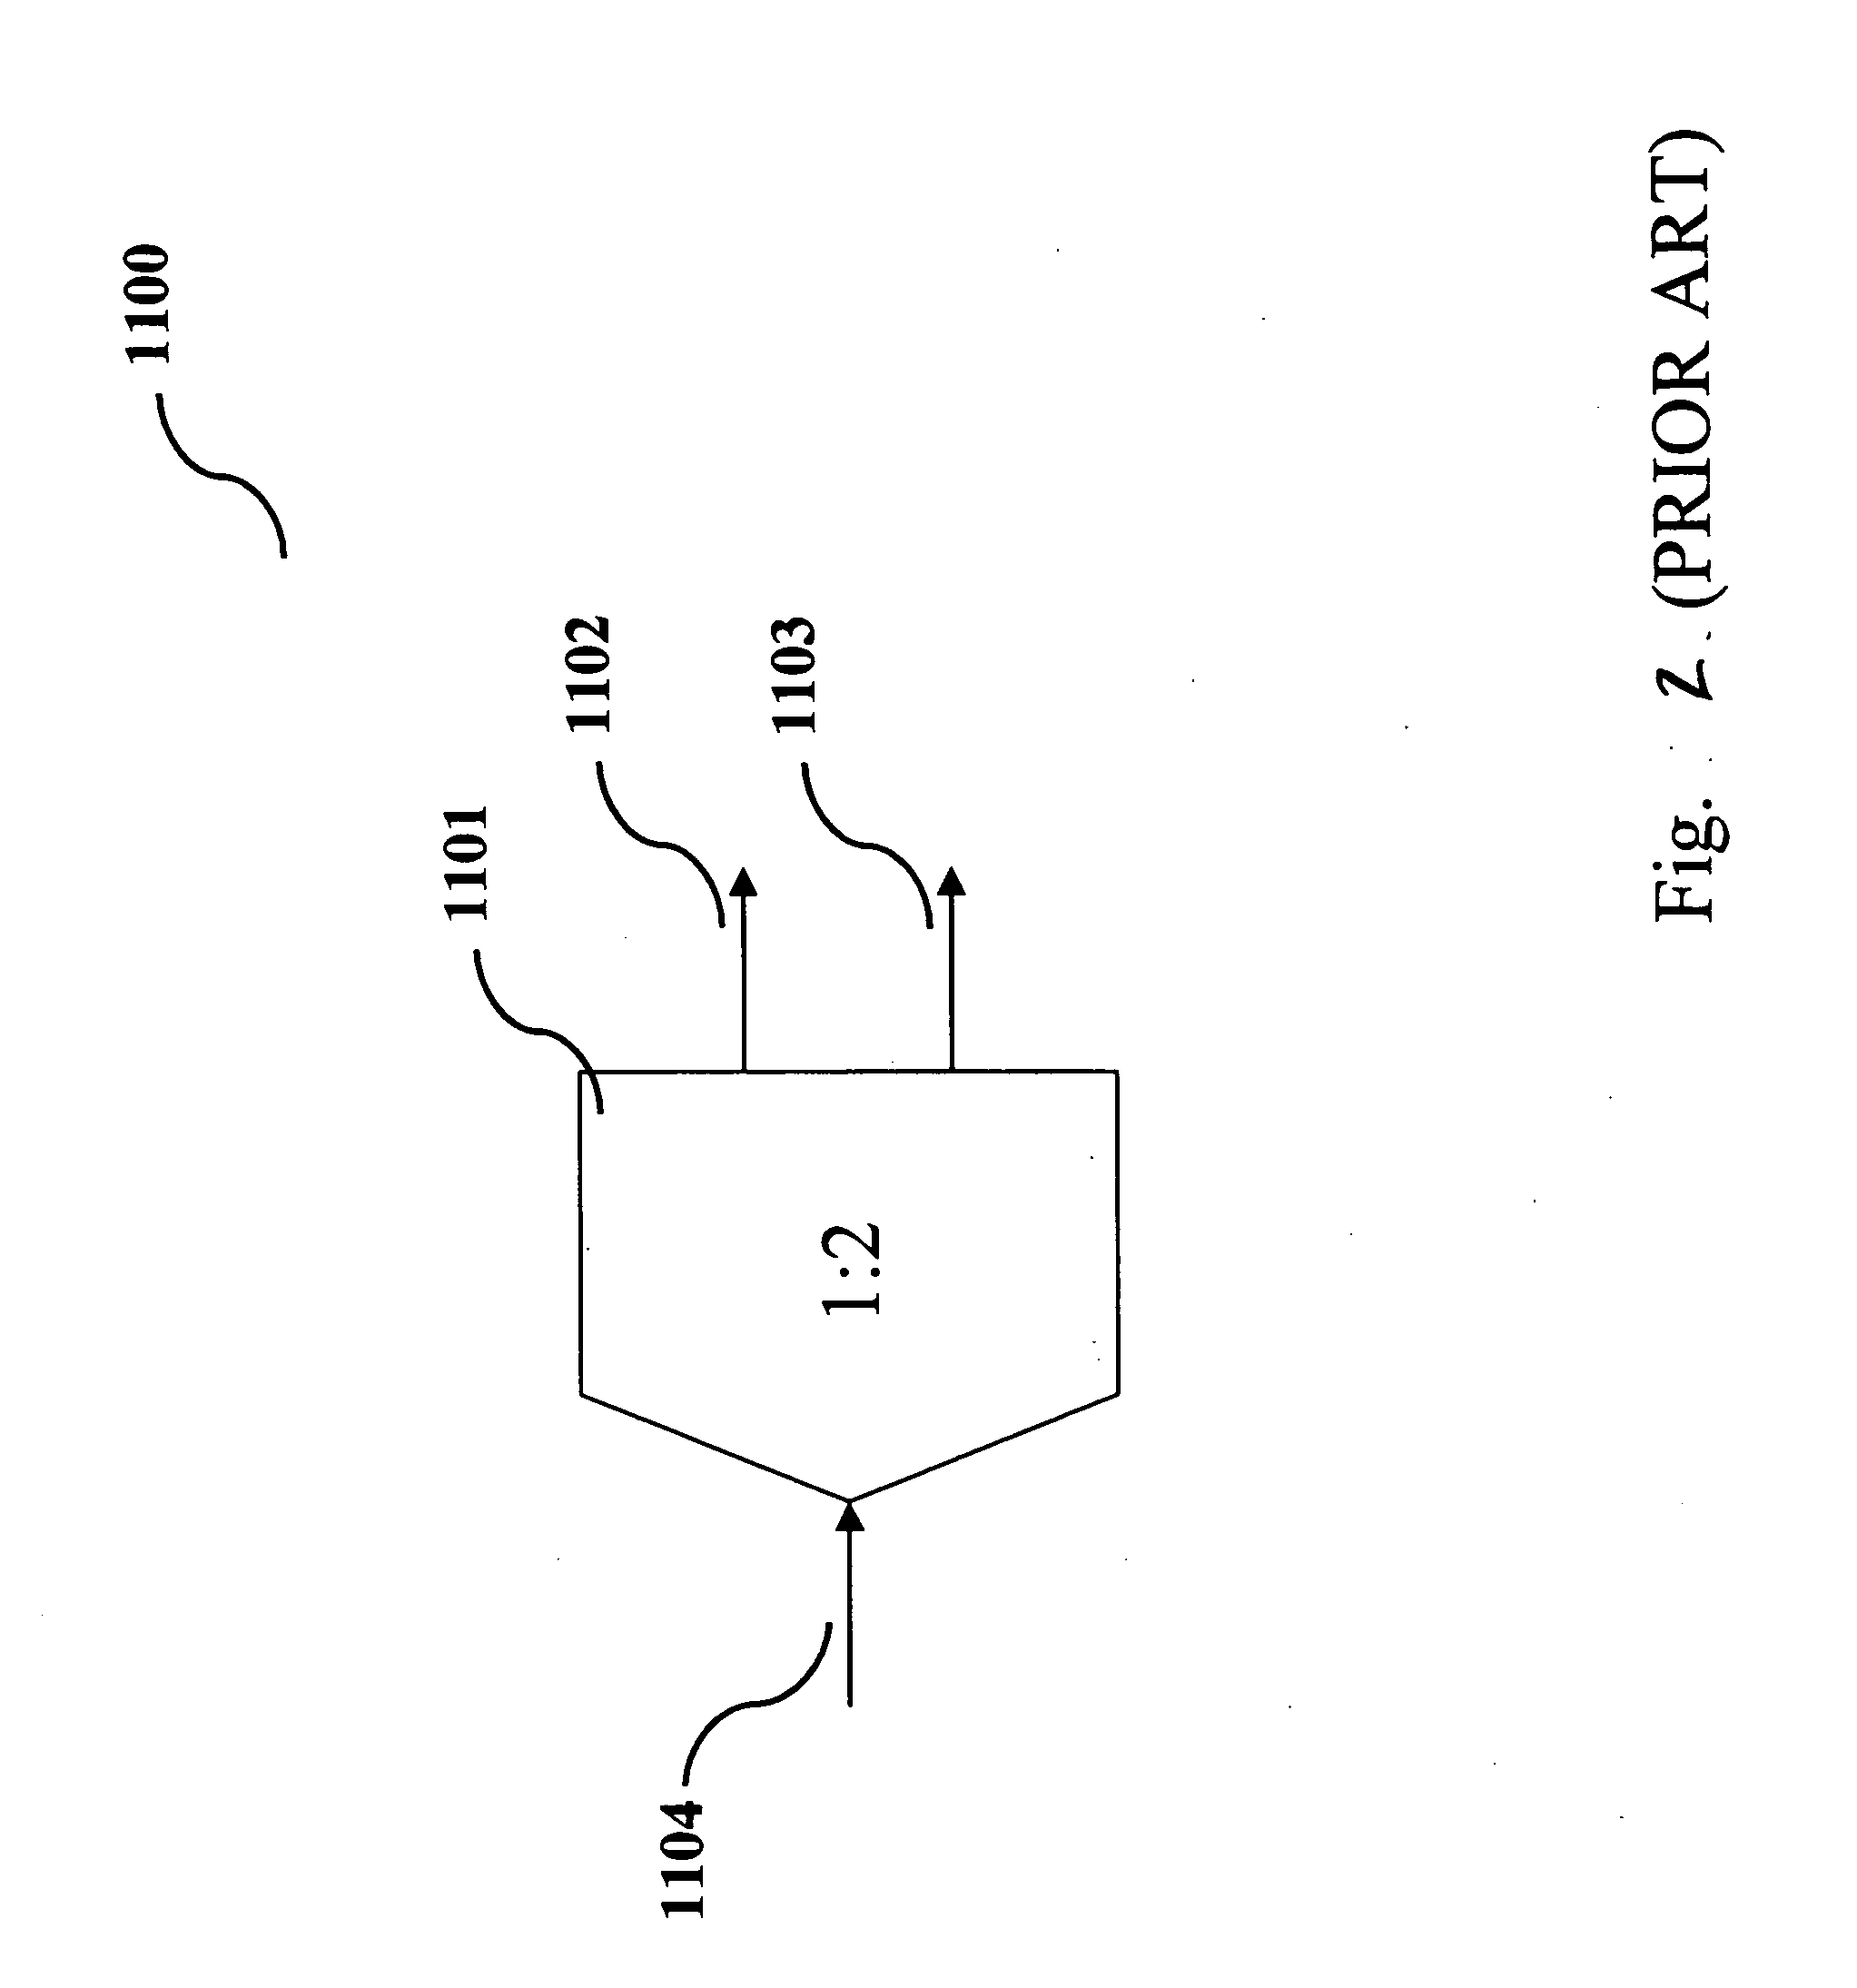 Wavelength division multiplexing add/drop system employing optical switches and interleavers